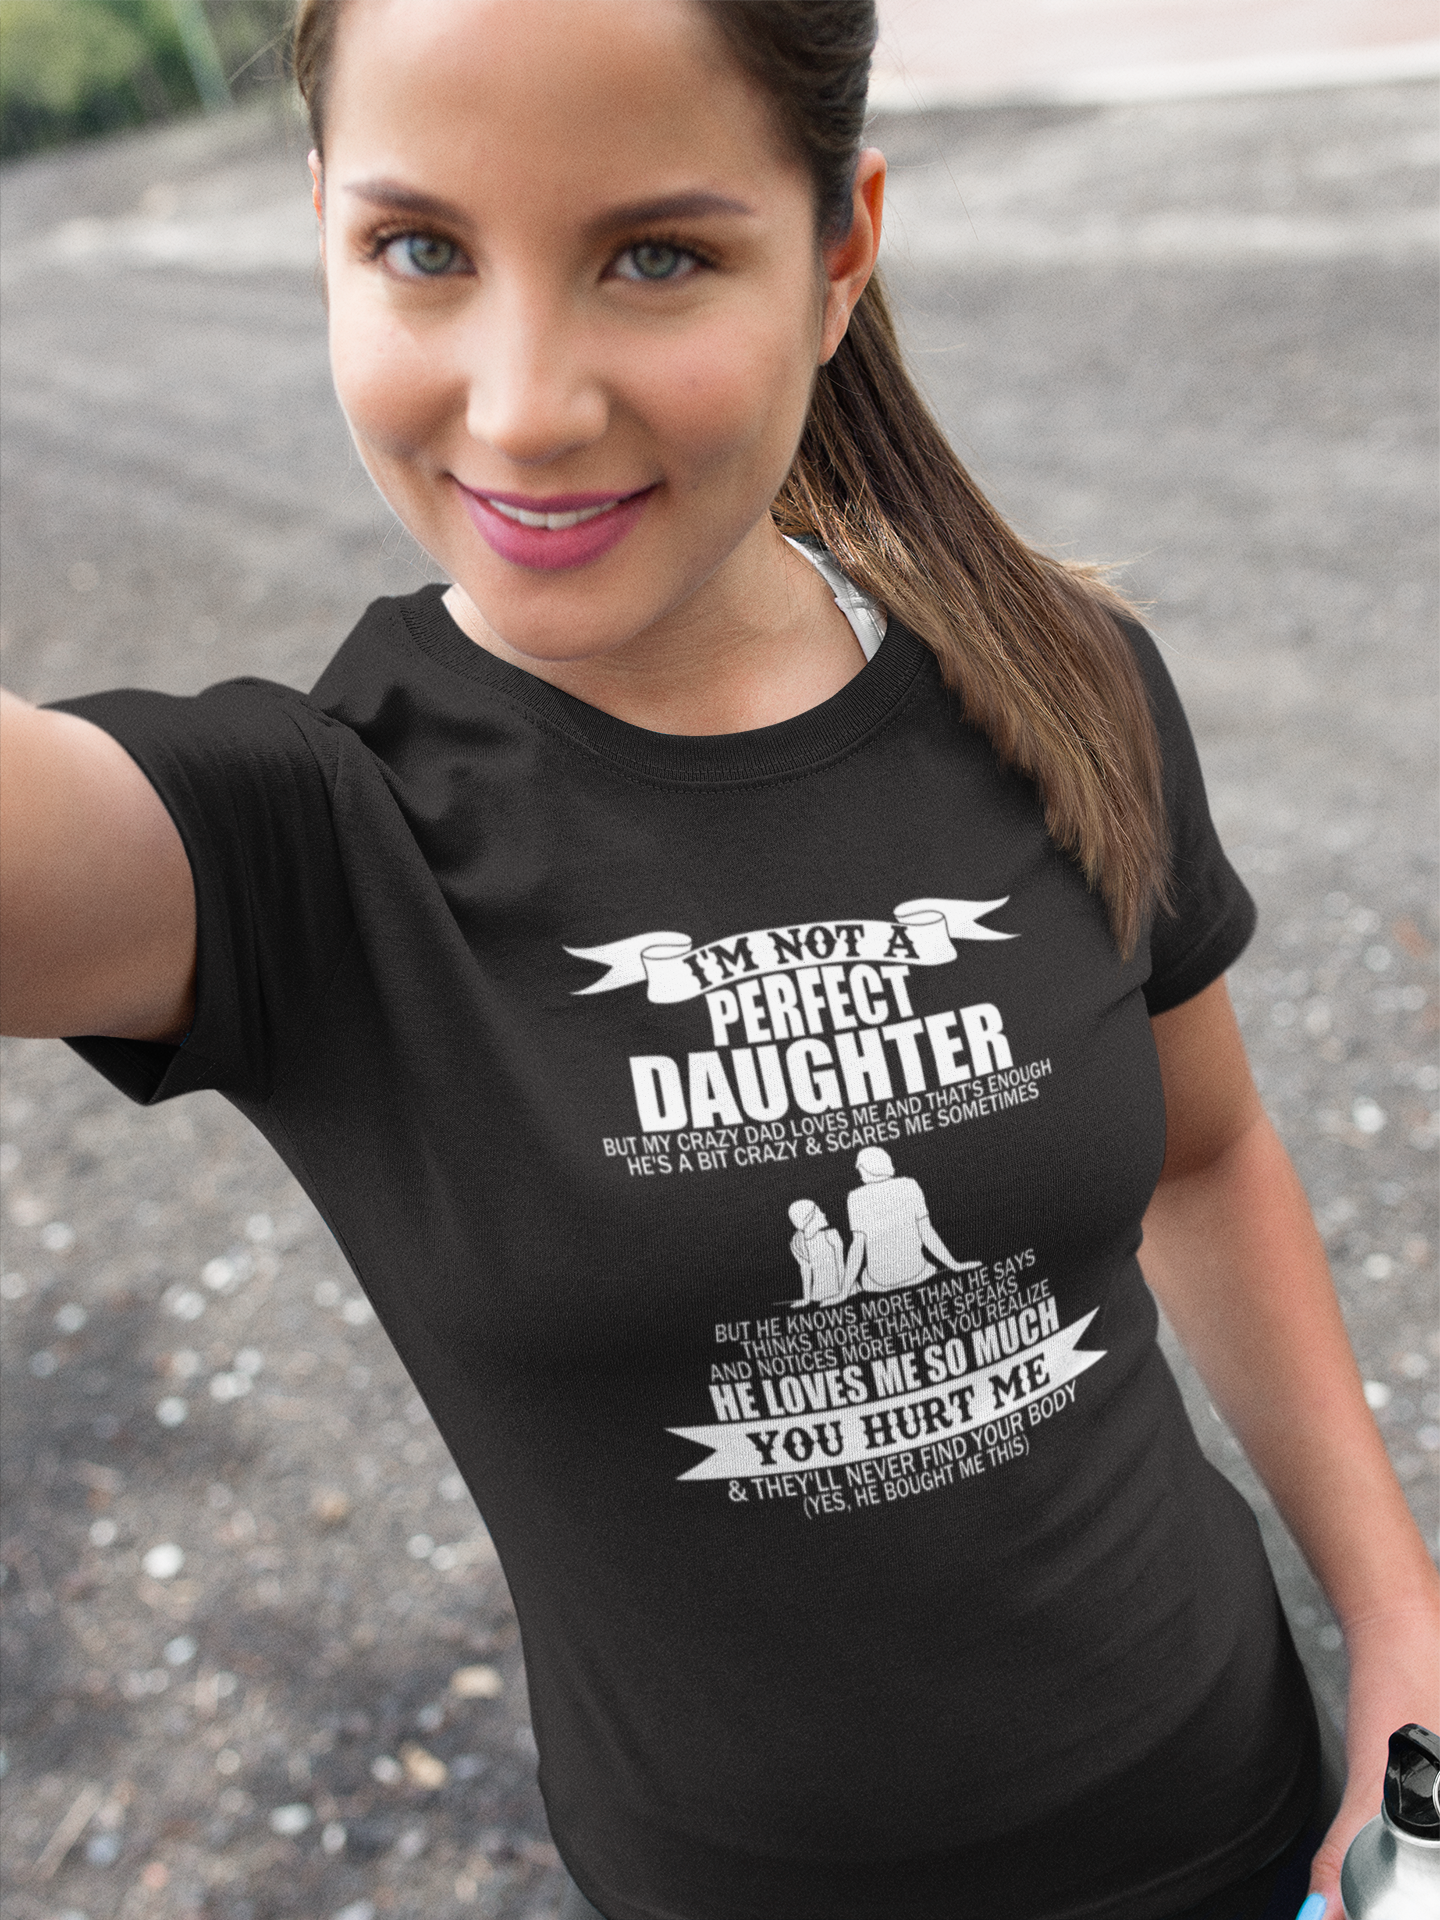 I'm not a perfect Daughter or Son CRAZY DAD  t-shirt